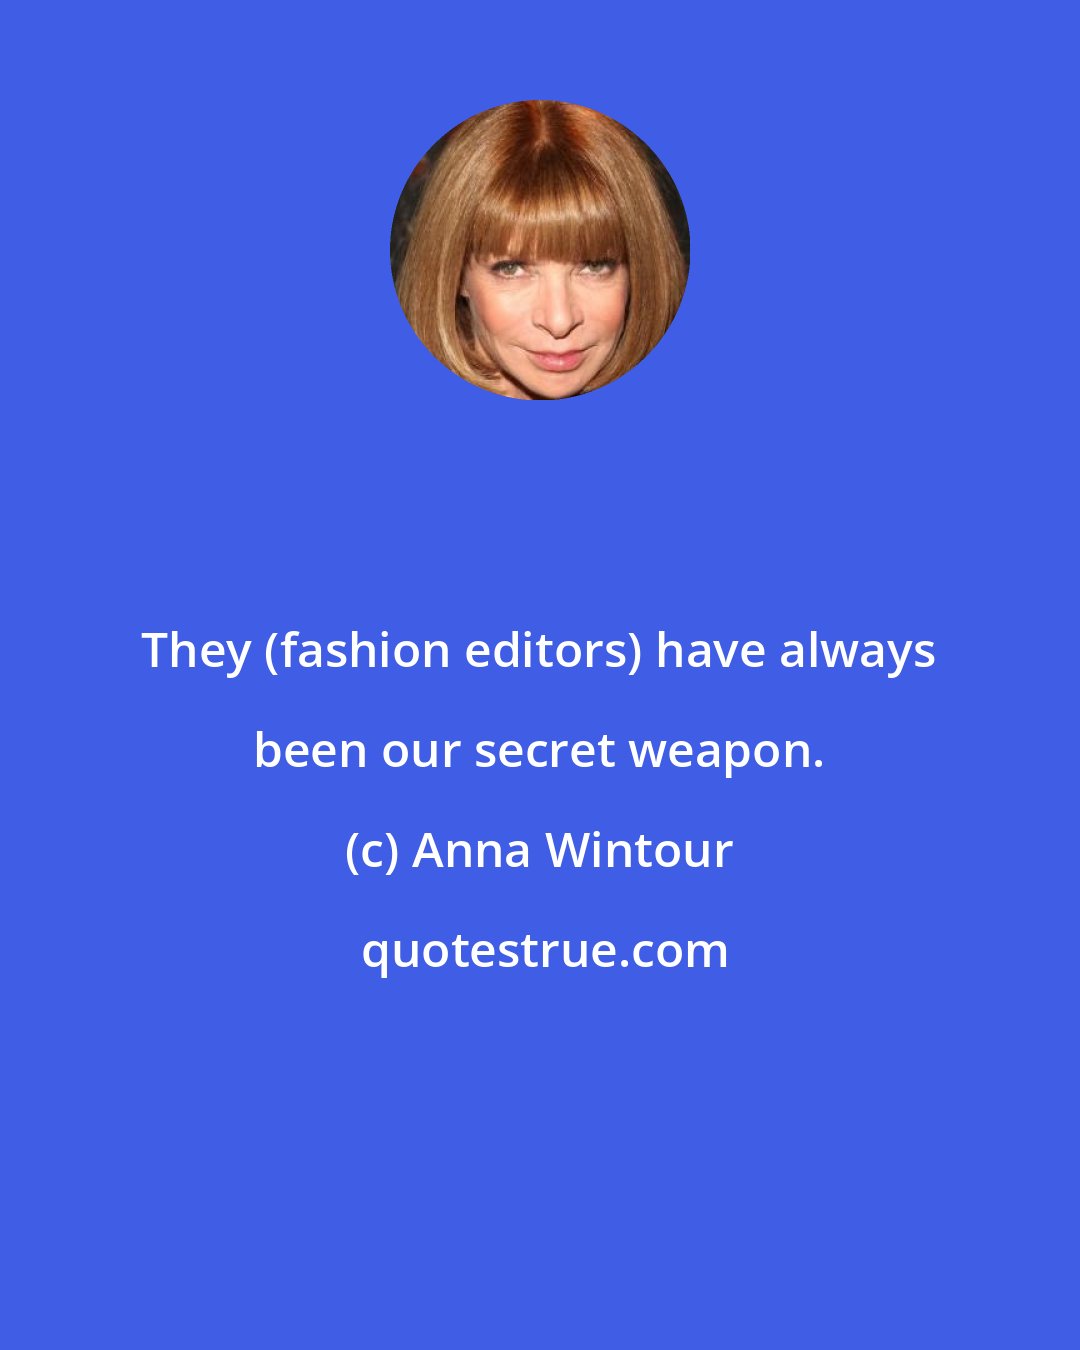 Anna Wintour: They (fashion editors) have always been our secret weapon.